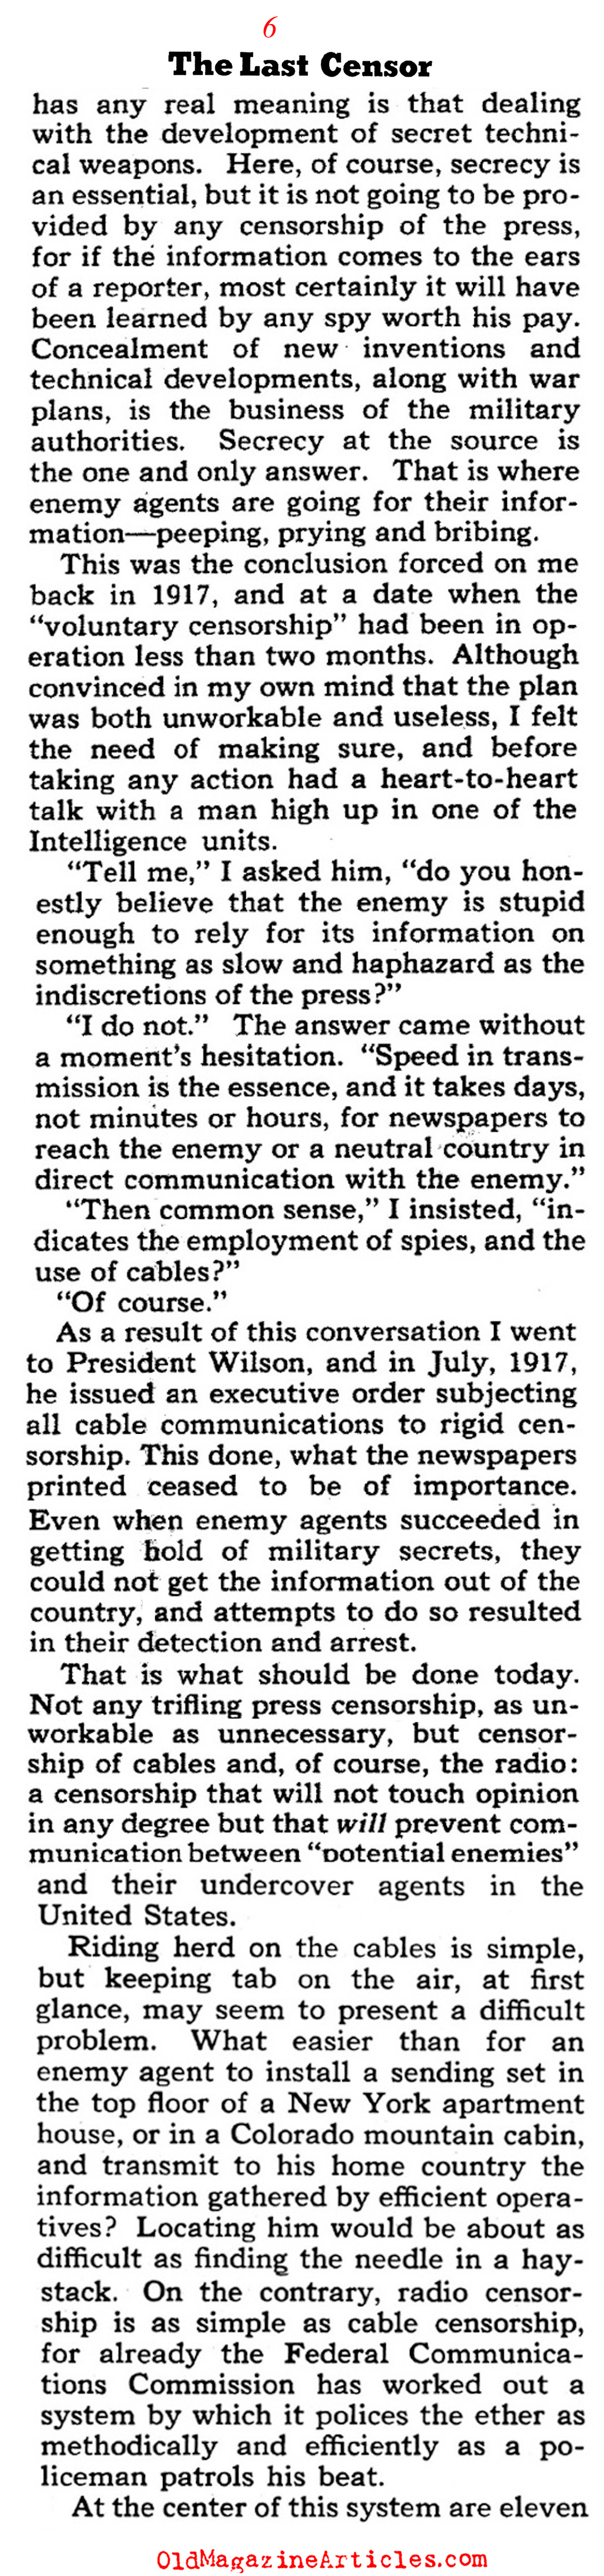 The Failures of W.W. I American Press Censorship (Collier's Magazine, 1941)